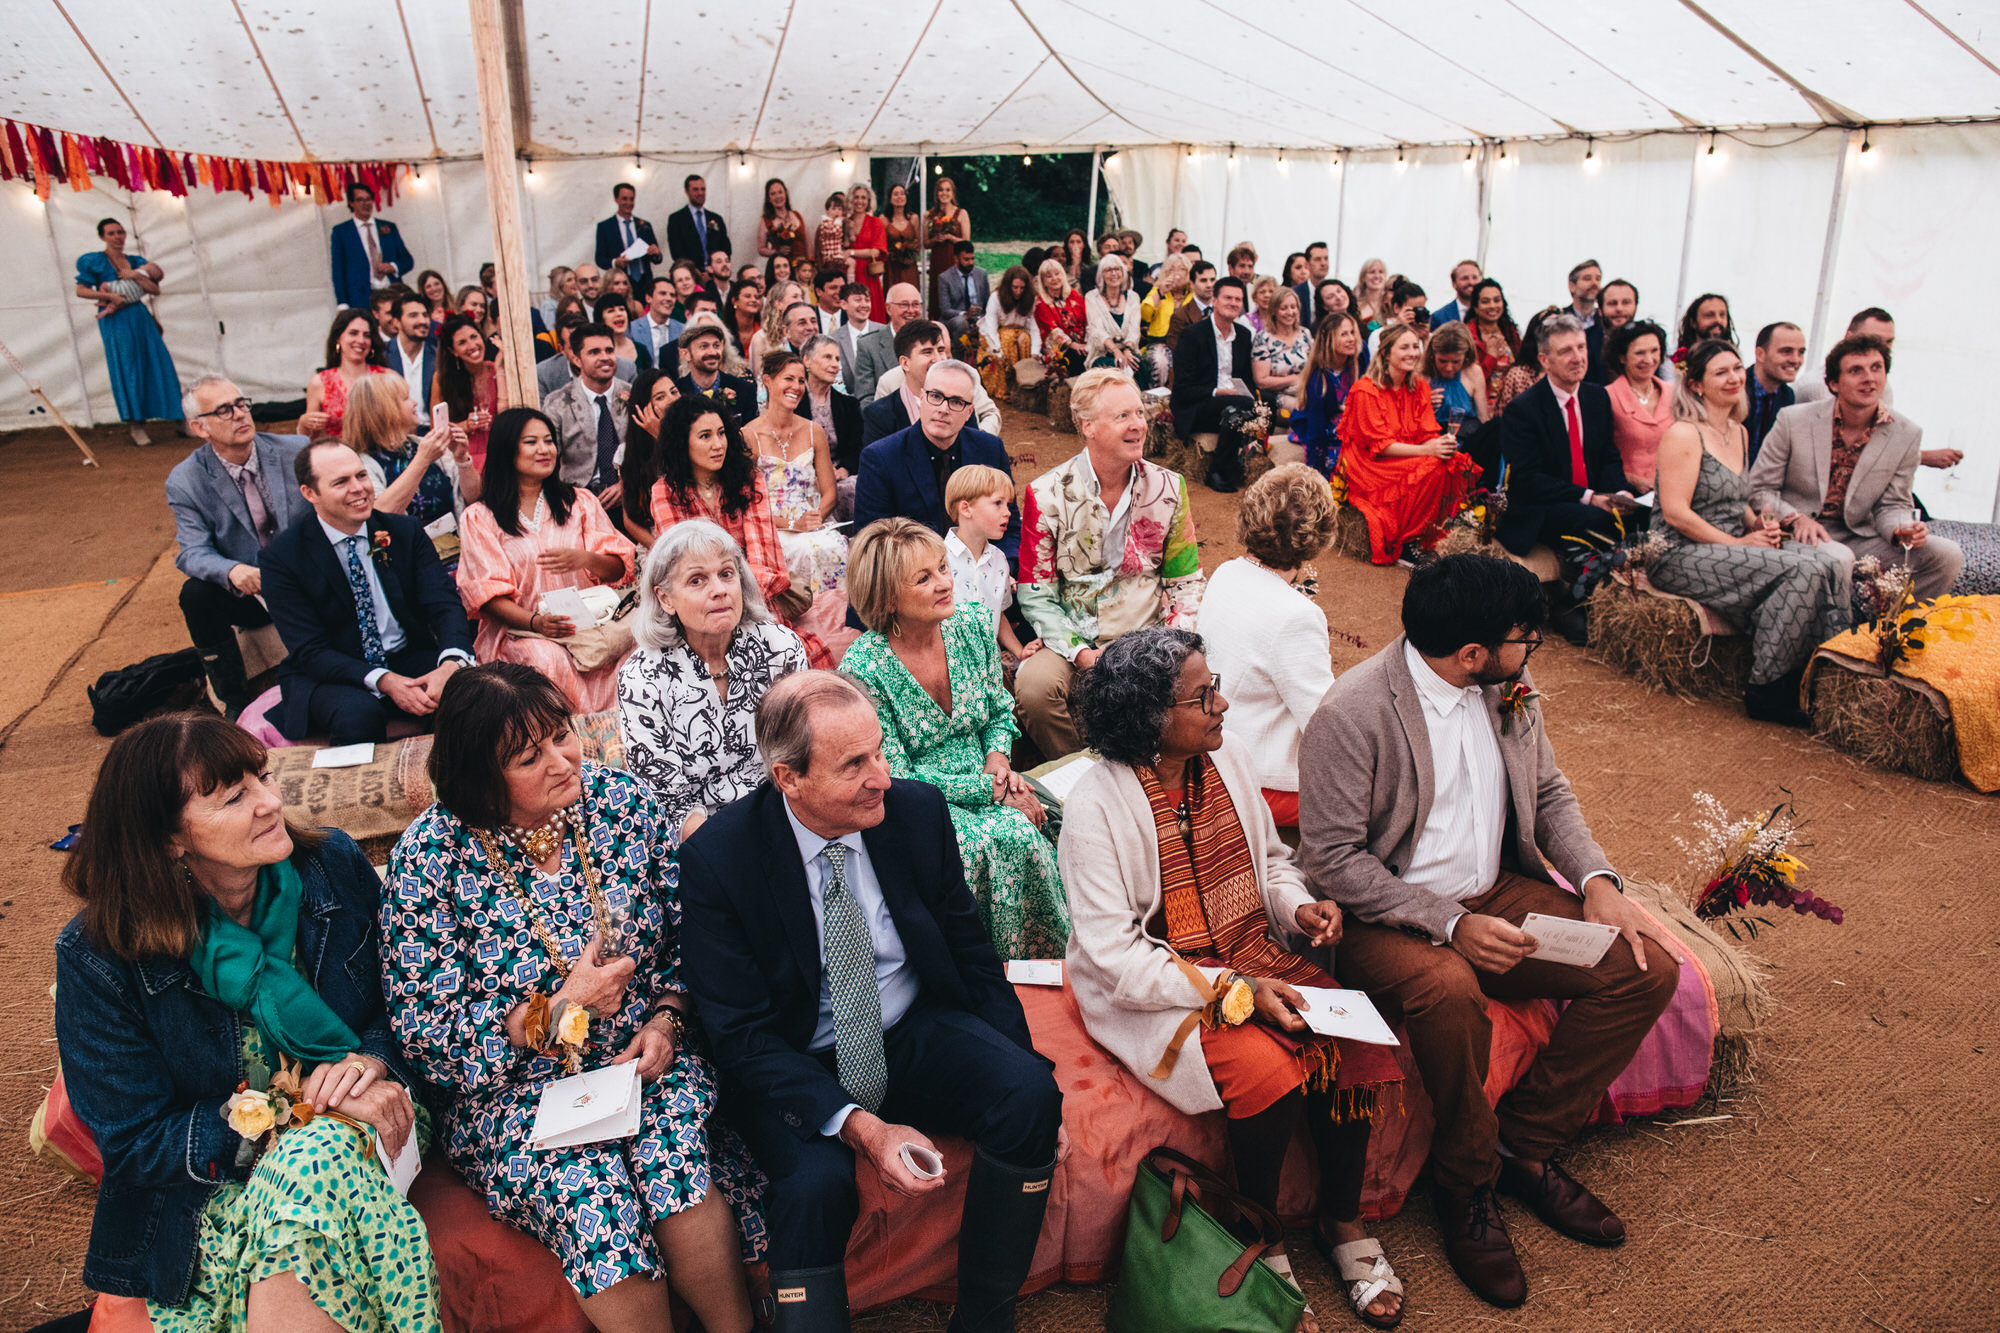 guests sitting inside marquee tent waiting for ceremony